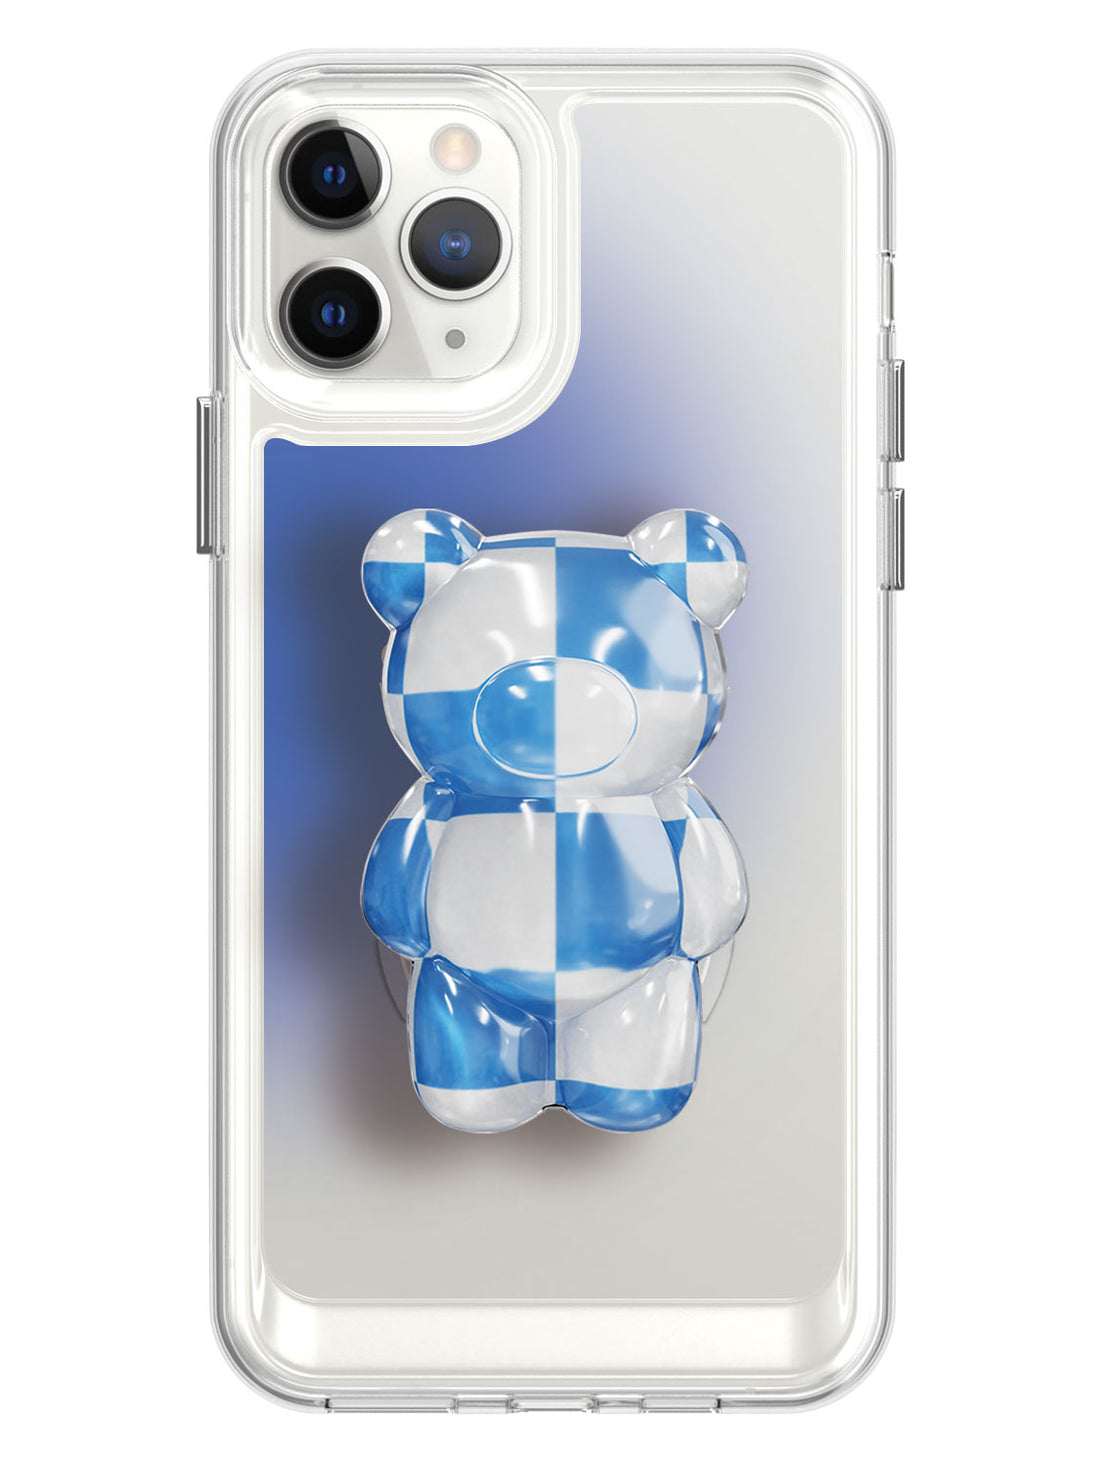 Stay Simple Clear Case with Blue Bear Pop Socket - iPhone 11 Pro Max